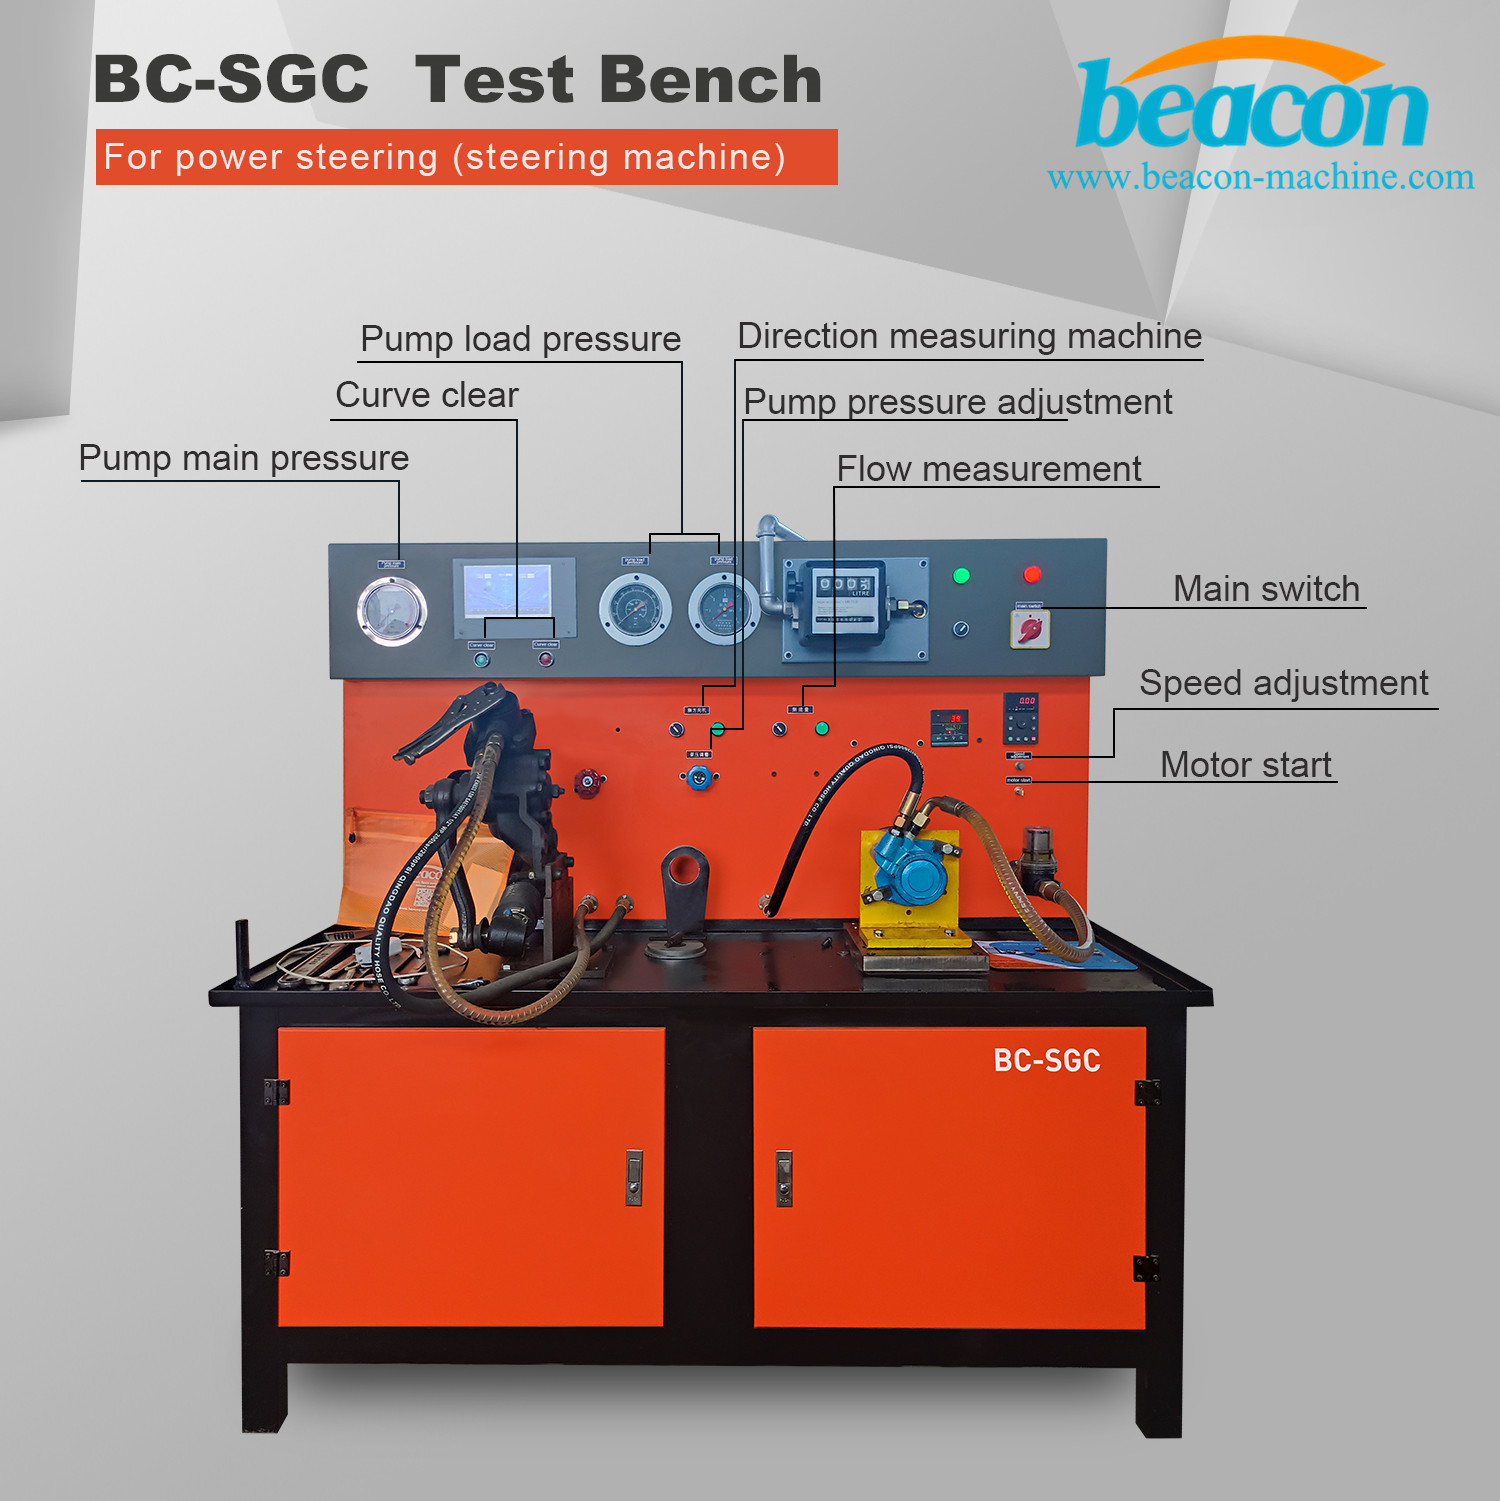 Beacon BC-SGC Hydraulic Pump Test Bench Hydraulic Press Machine For Steering Gear And Booster Pump